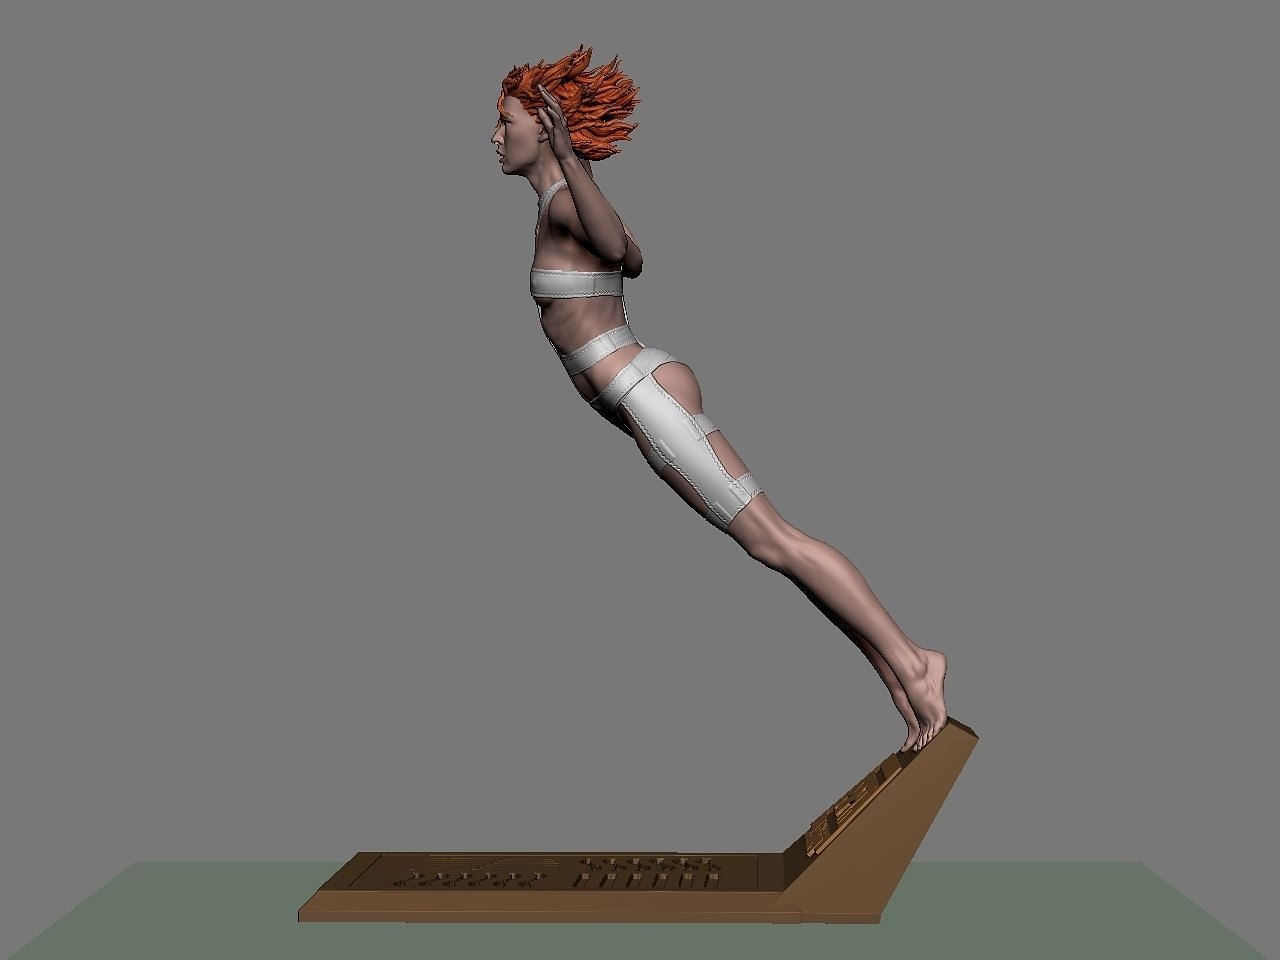 Leeloo Flying from The Fifth Element